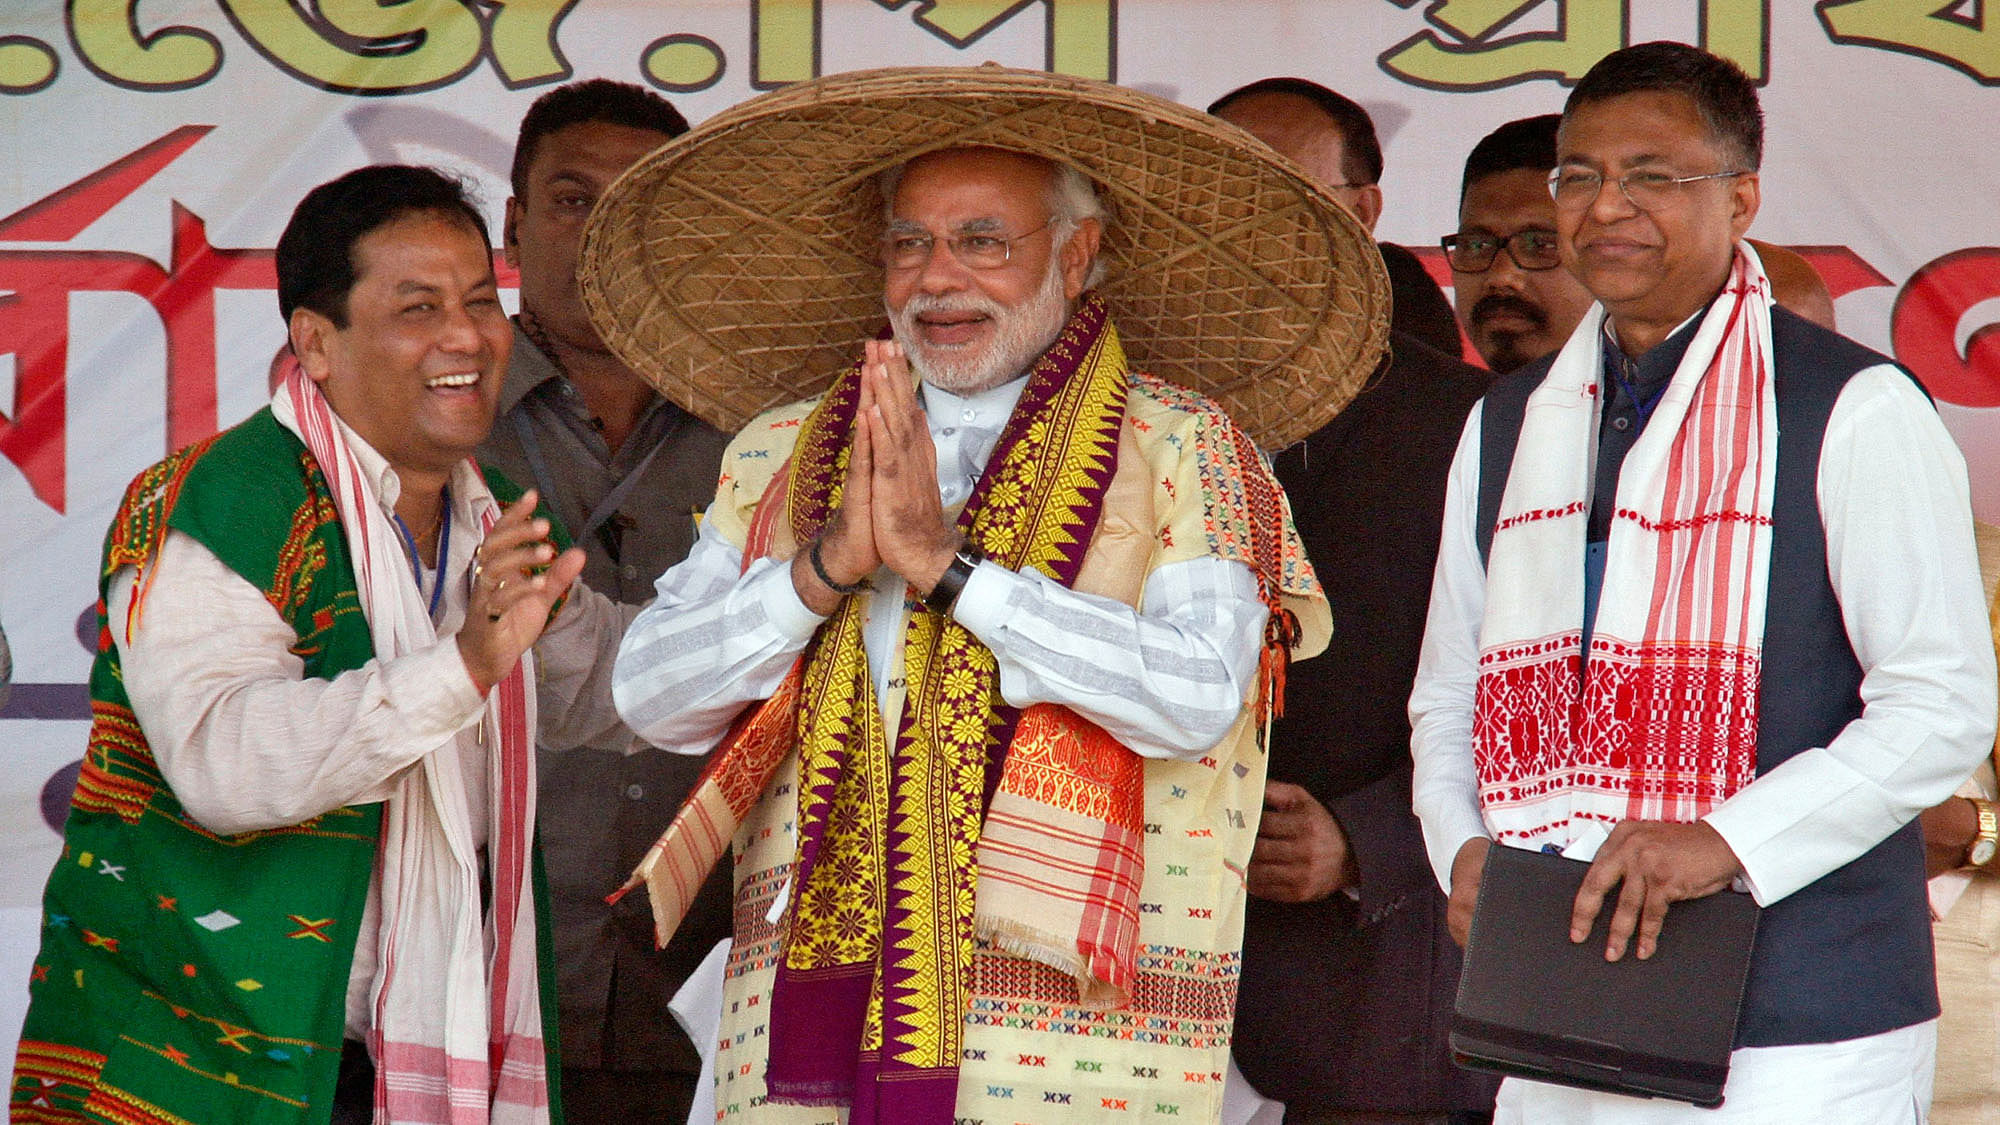 

Narendra Modi wearing a “Japi” (a traditional hat of Assam) receives a wooden Rhino by his supporters during a rally ahead of the 2014 general elections, at Guwahati. (Photo: Reuters)